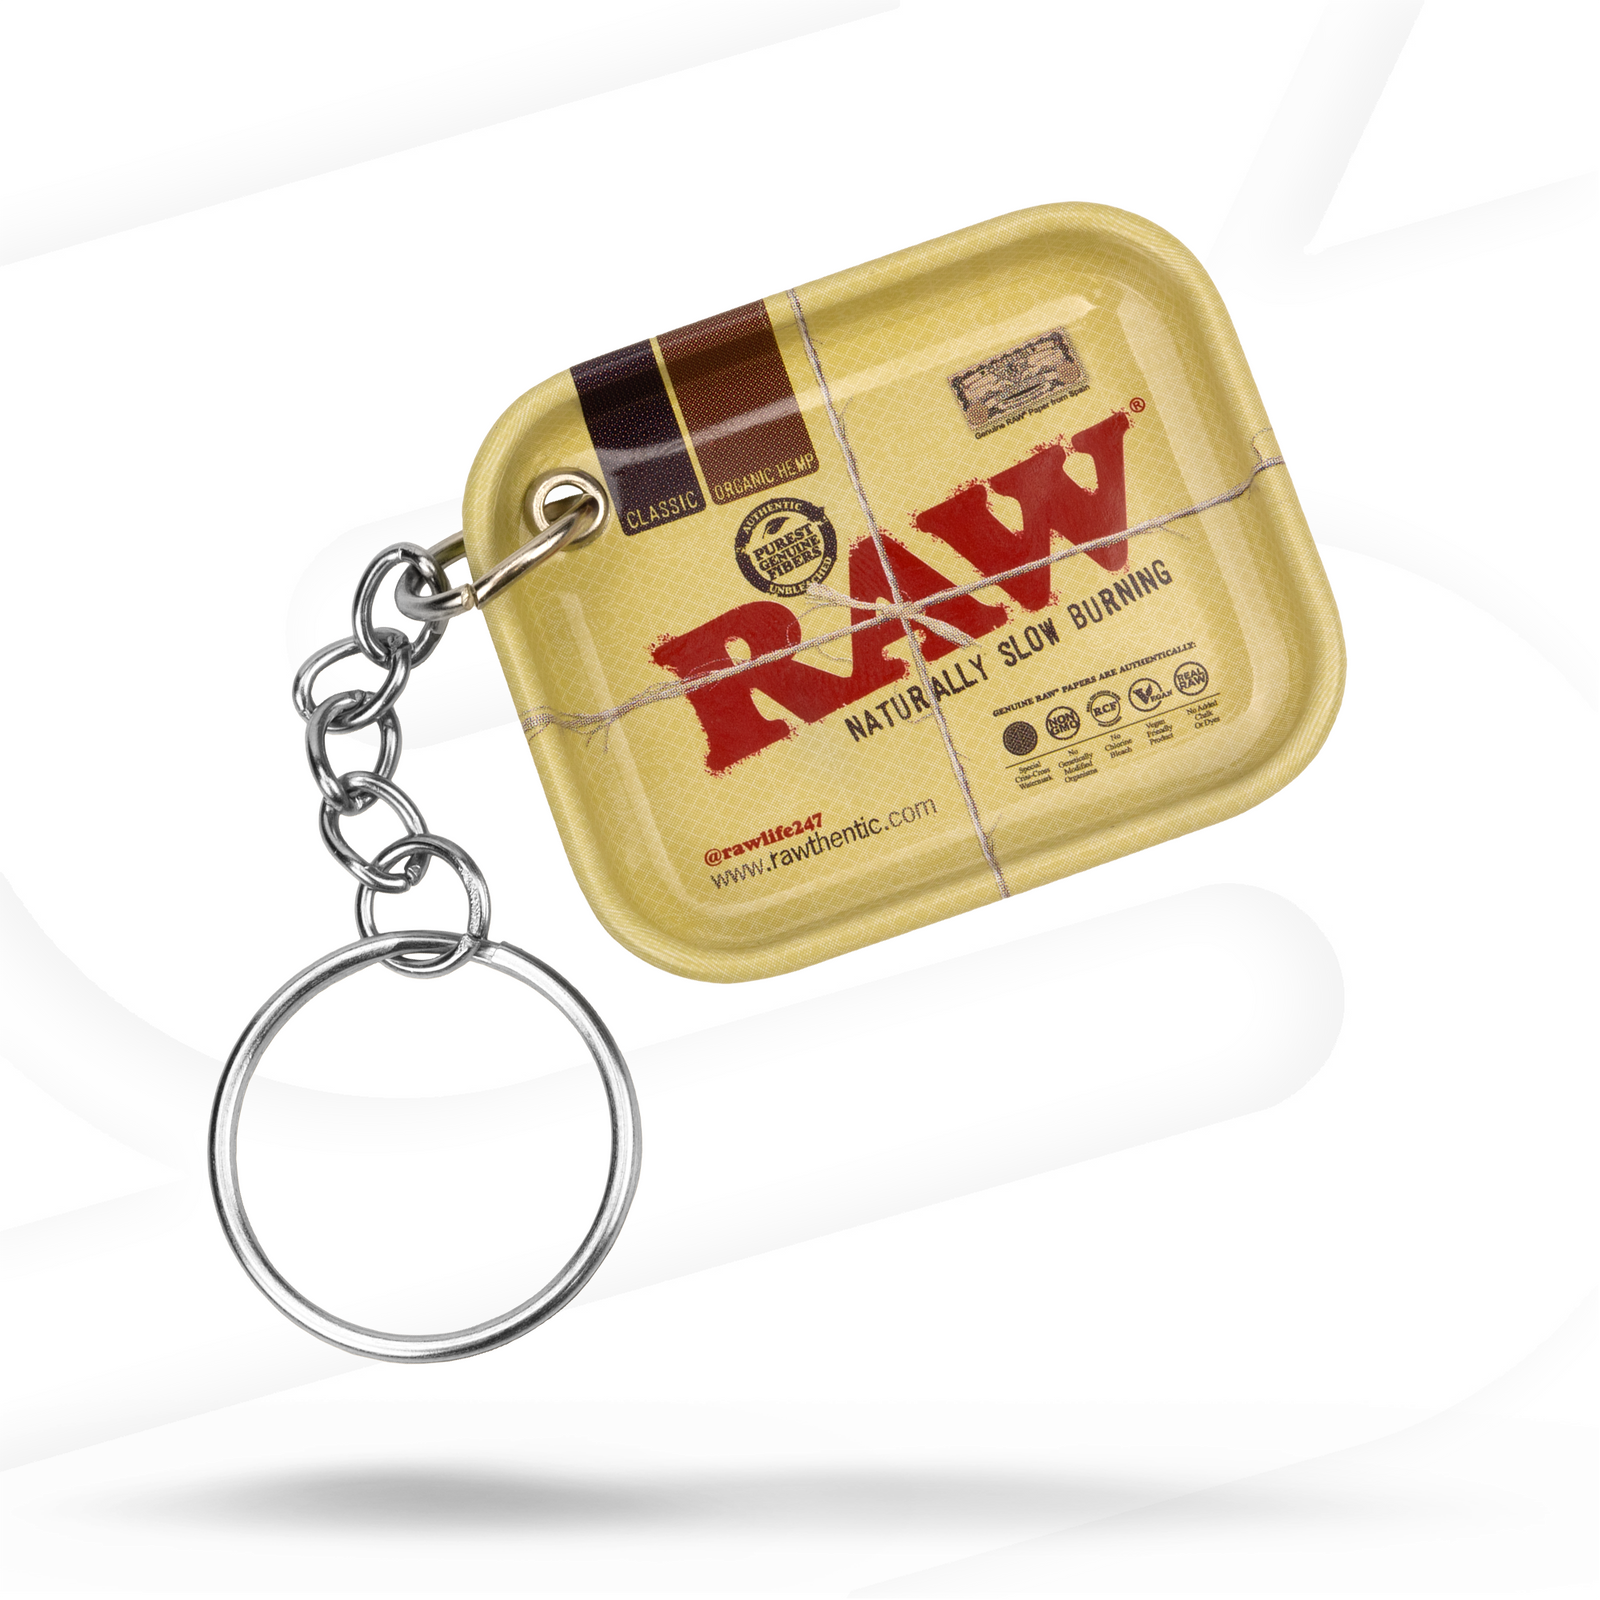 ESD Official,Buy RAW Products,Distributor - Smoking Accessories Online